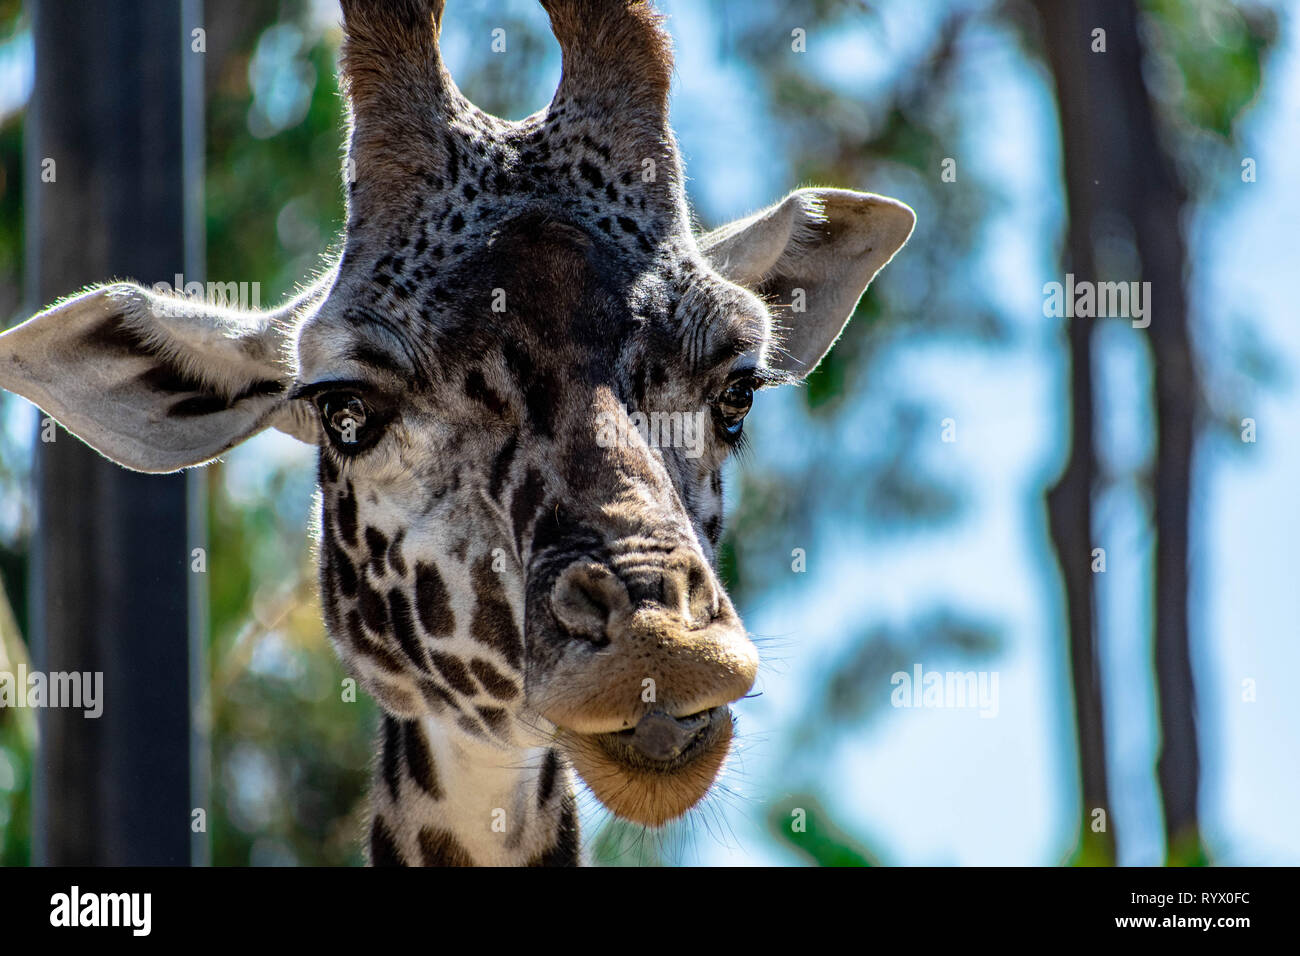 A close up of the head of a giraffe Stock Photo